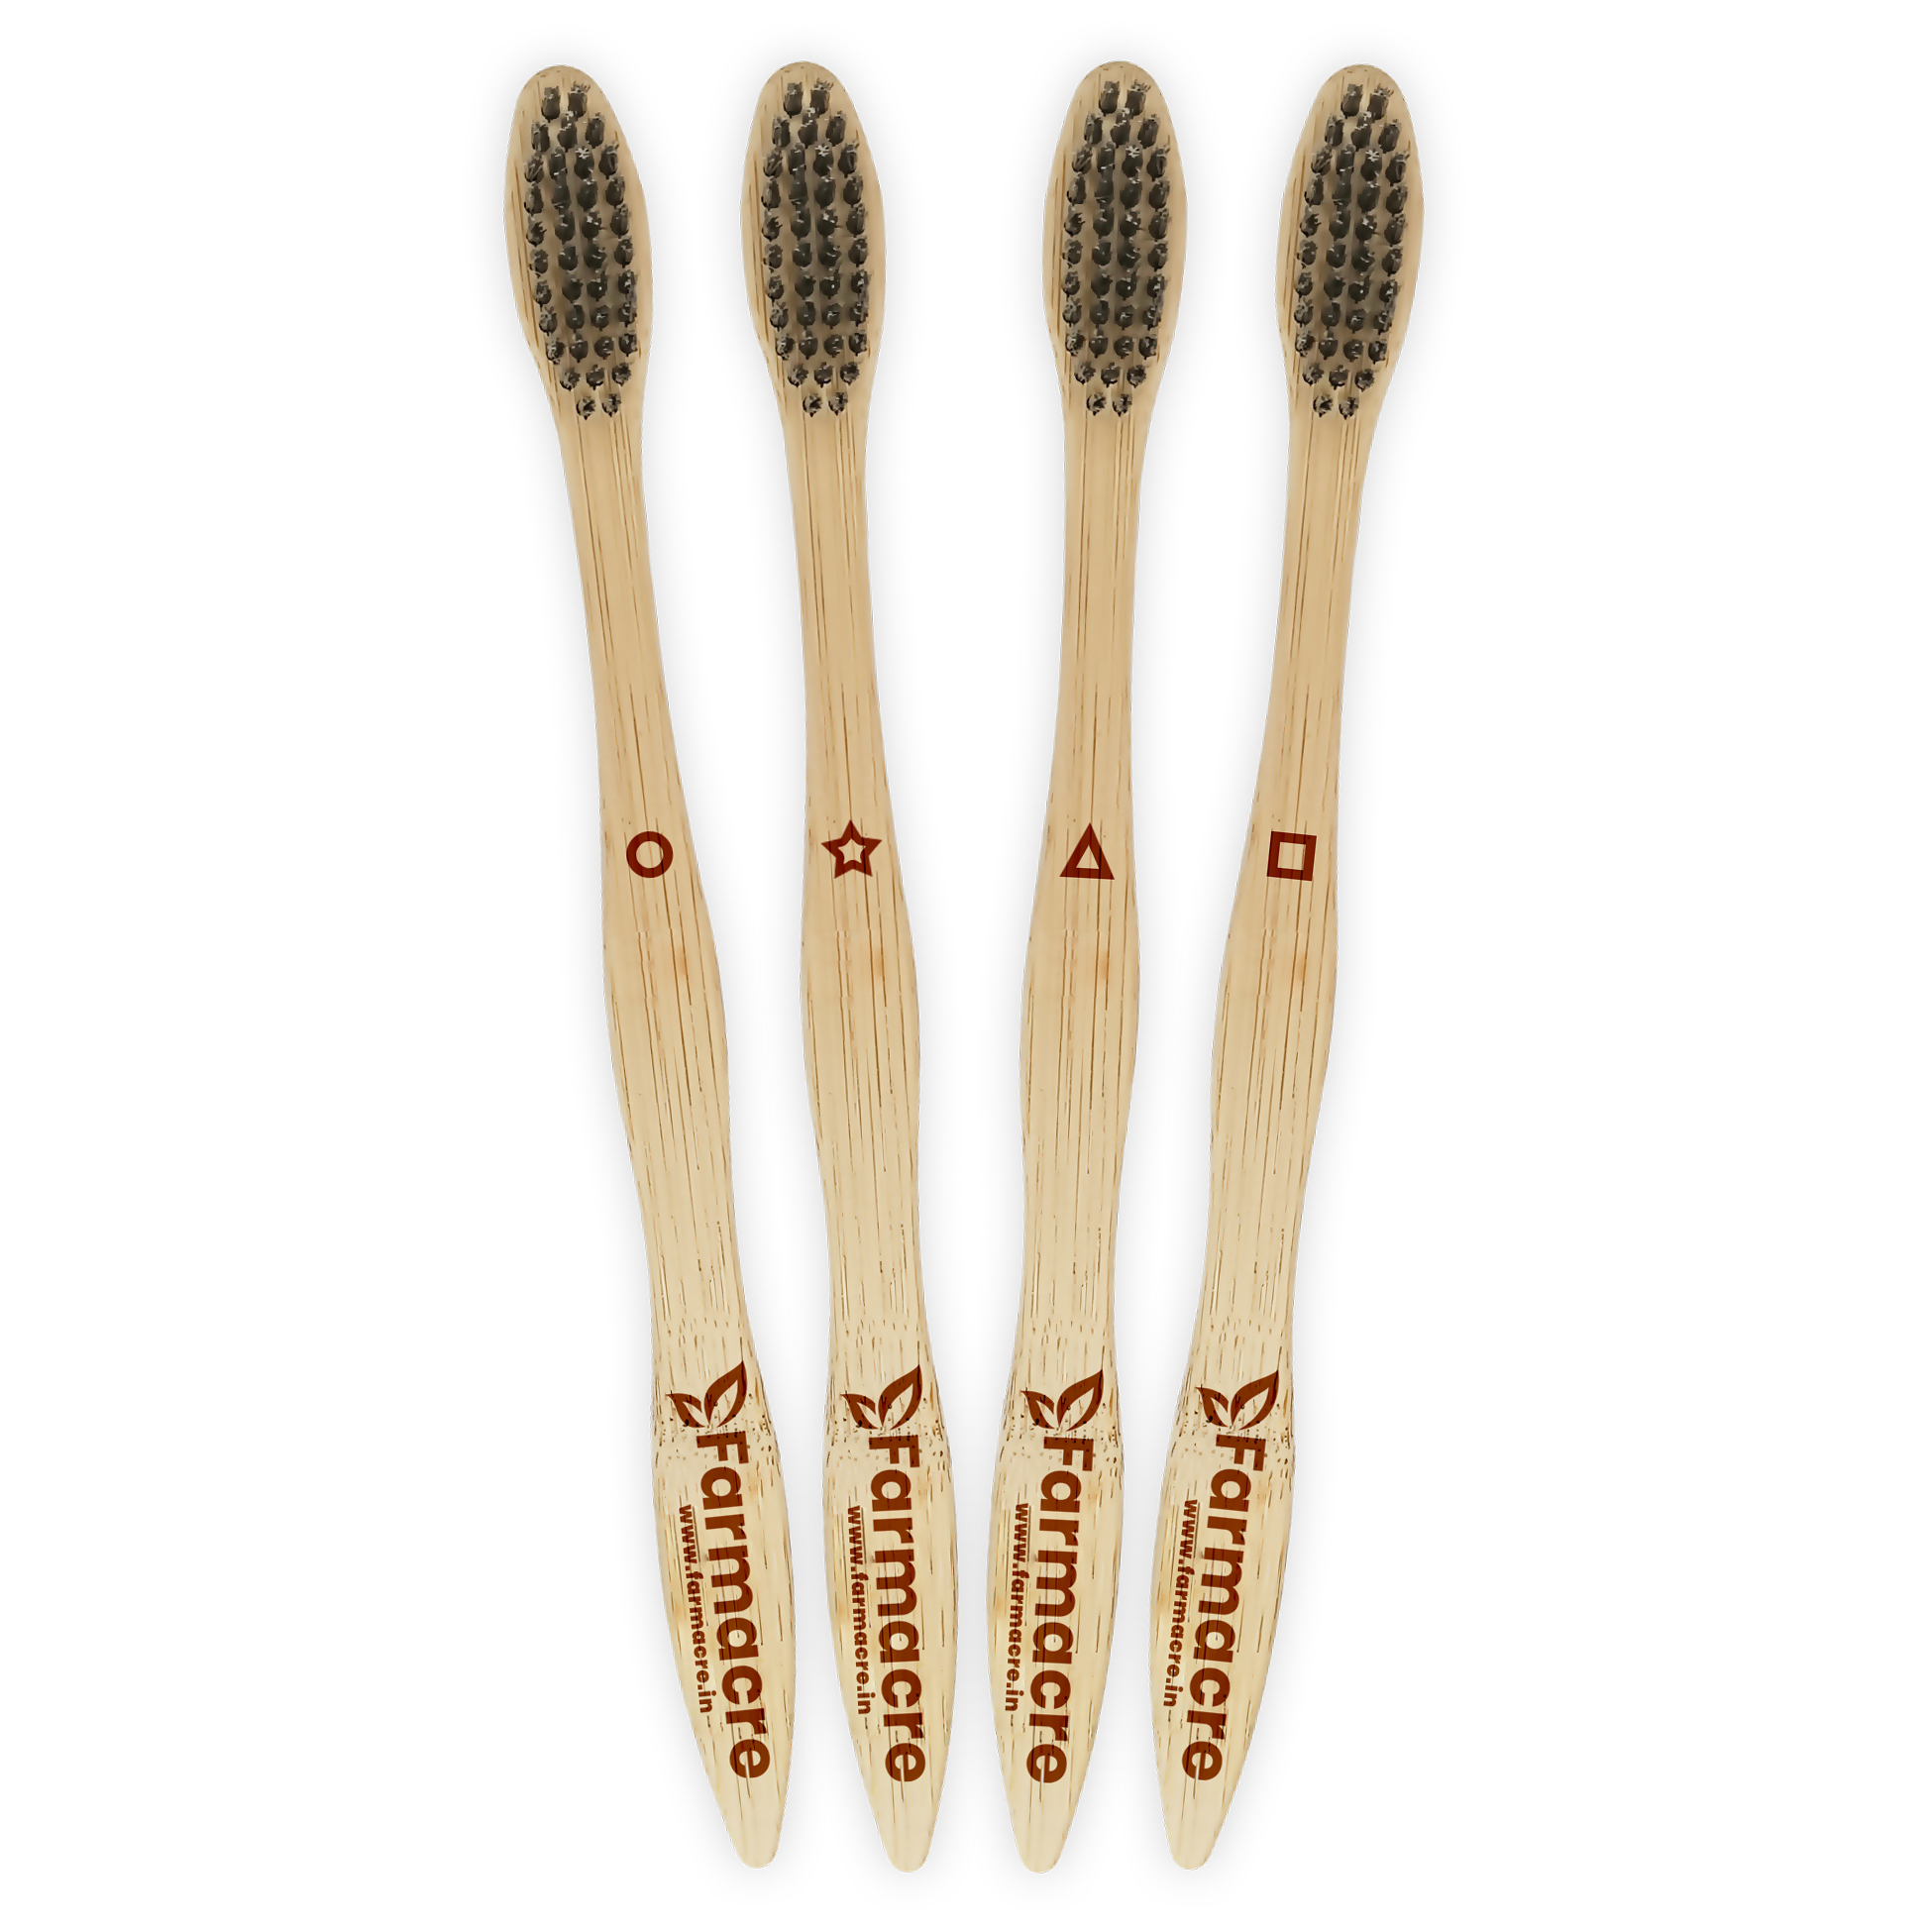 Farmacre Bamboo Toothbrush with Soft Bristles